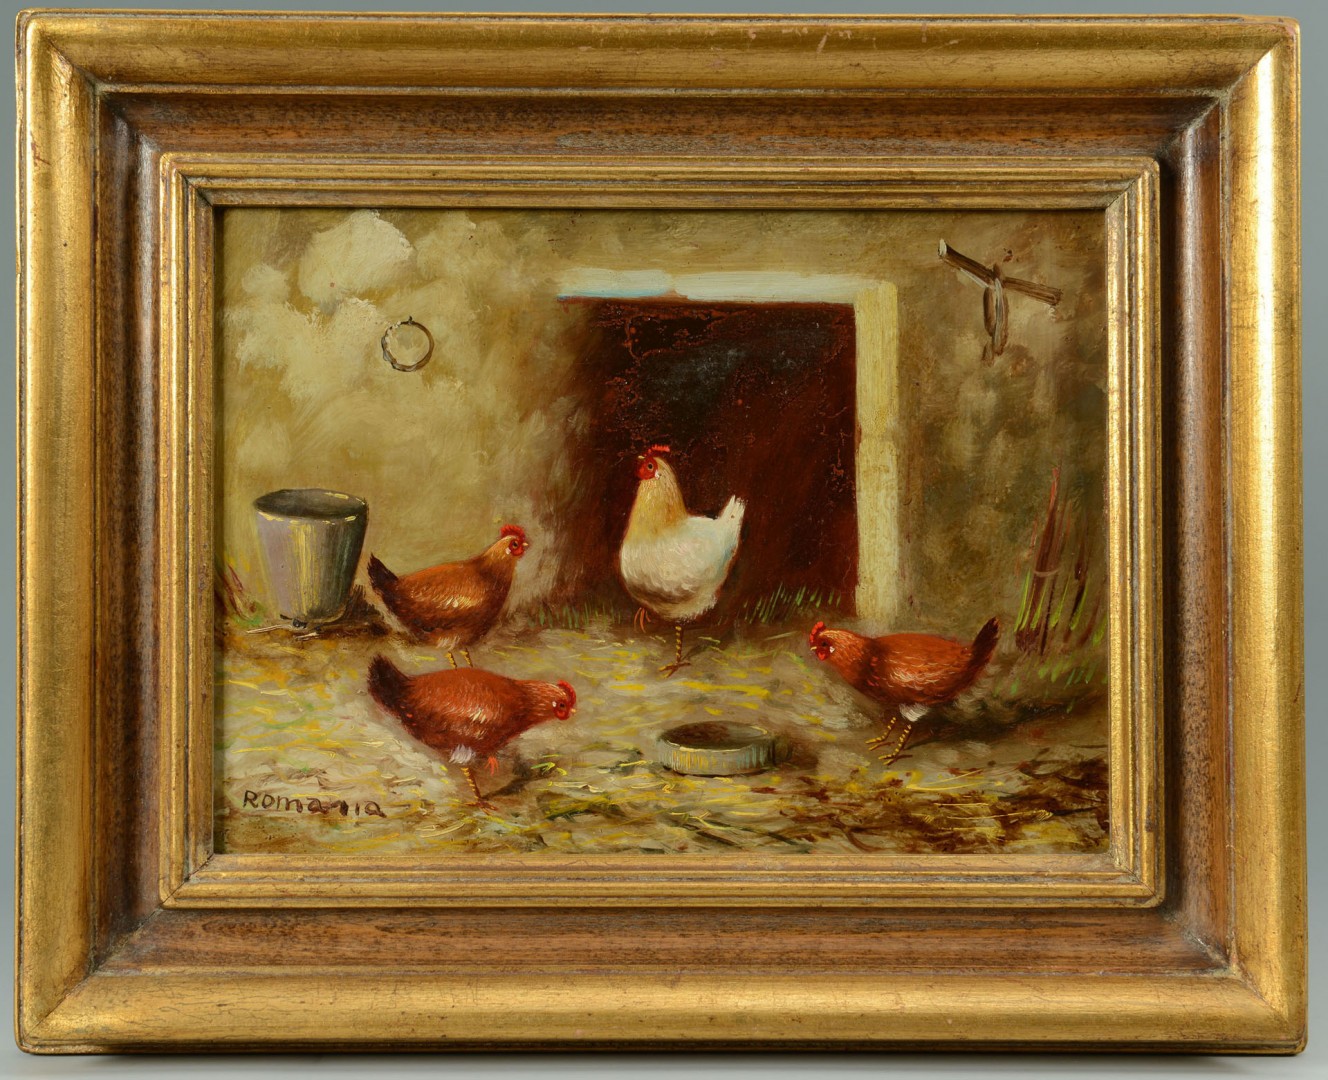 Lot 606: Pair of Chicken paintings by G. Romania